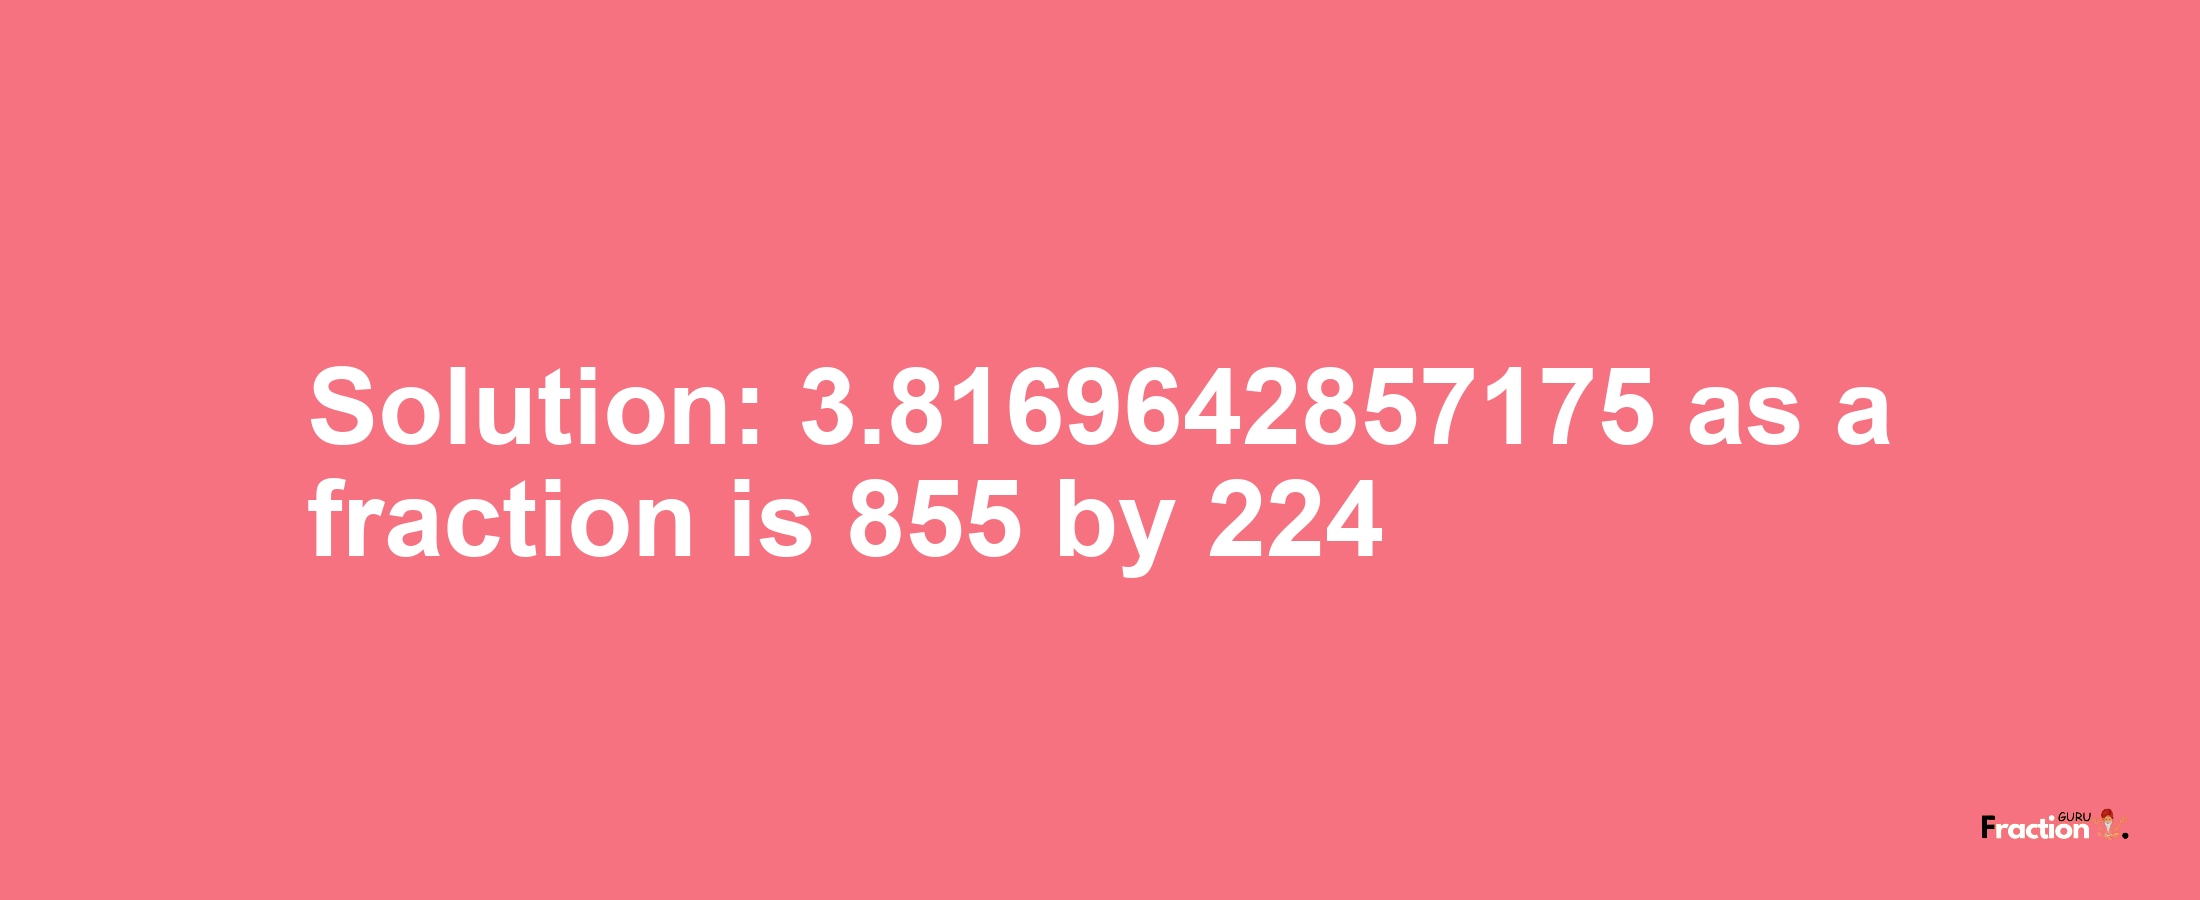 Solution:3.8169642857175 as a fraction is 855/224